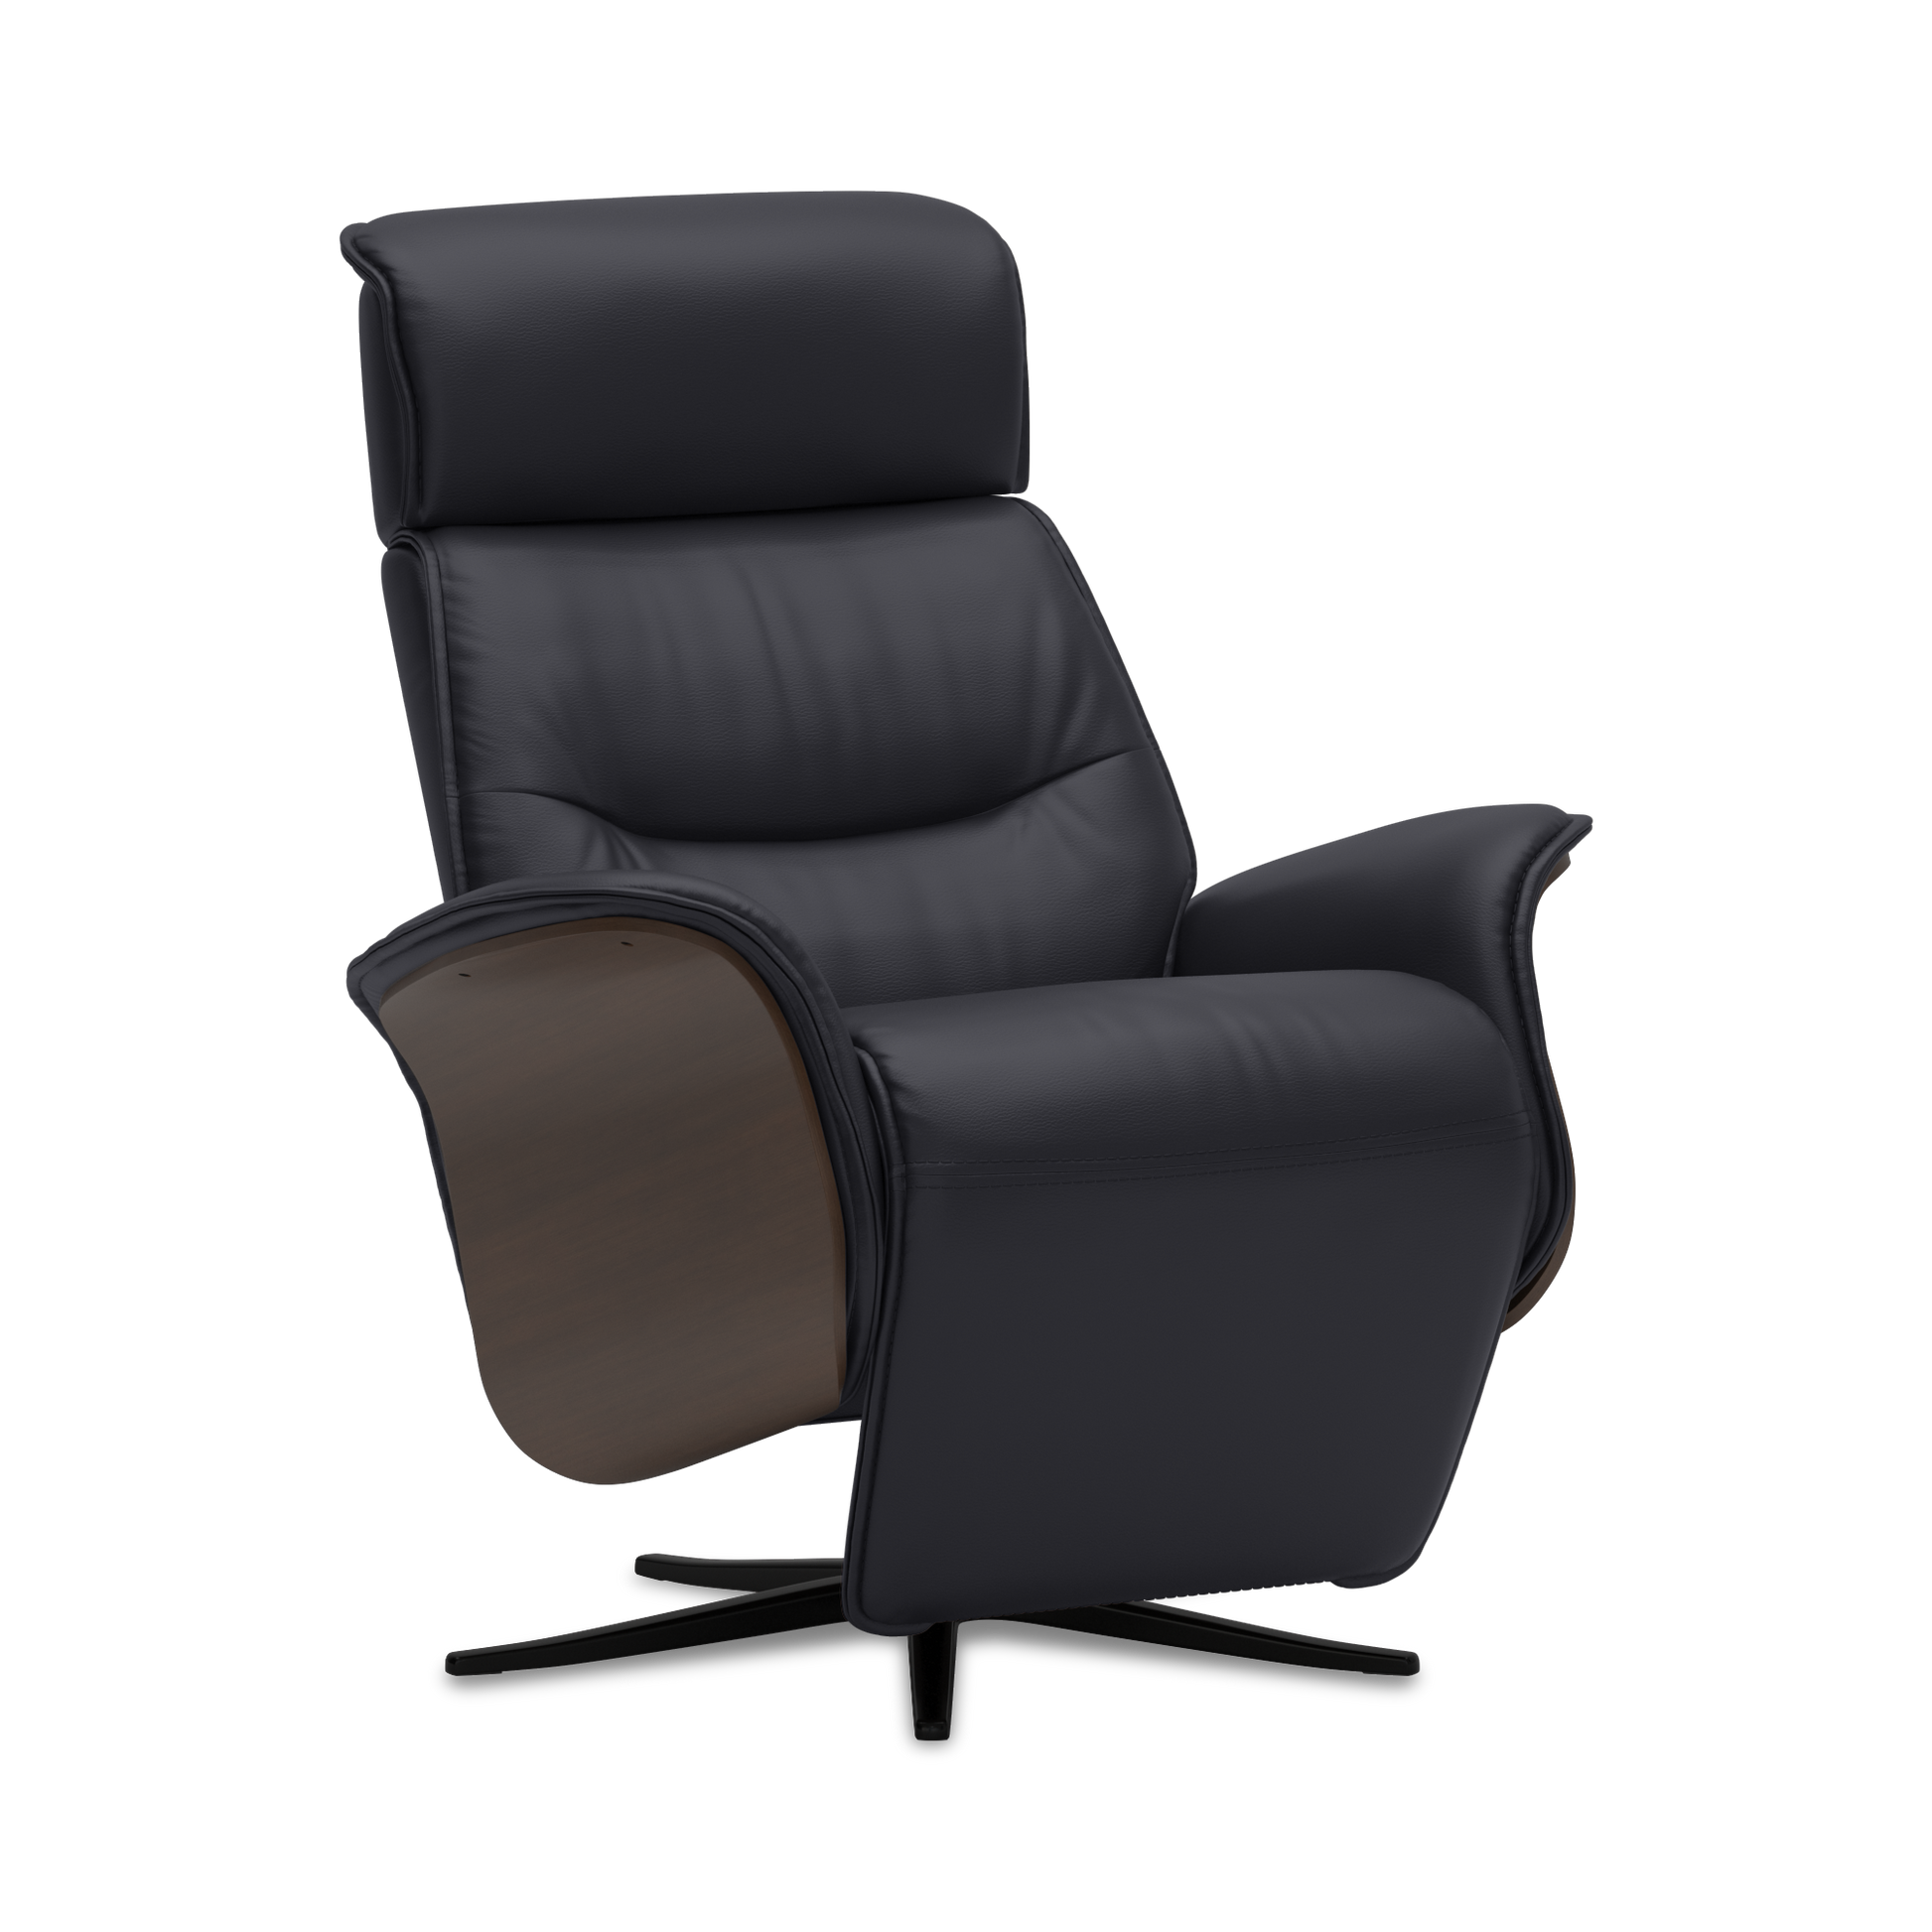 Space 5300 Integrated Manual Recliner Sale by IMG Comfort Norway Stockist Make Your House A Home, Furniture Store Bendigo. Australia Wide Delivery.